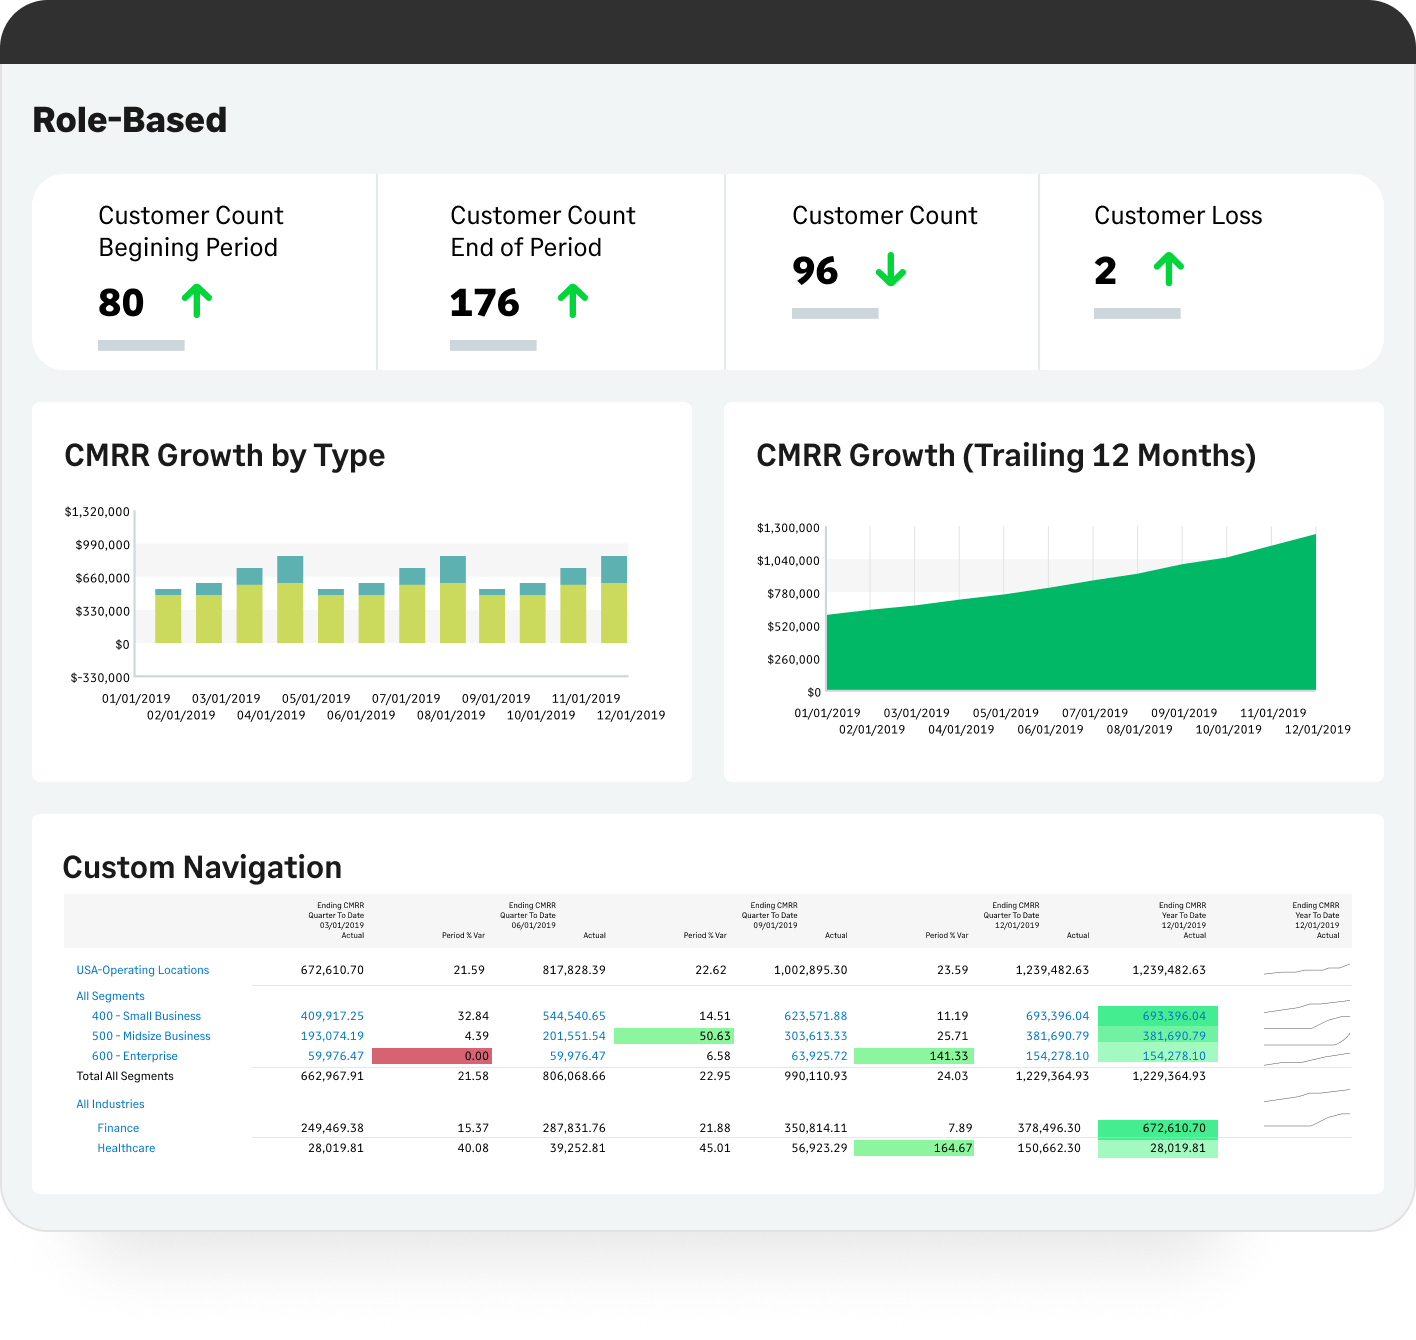 A role-based dashboard for a software organization.